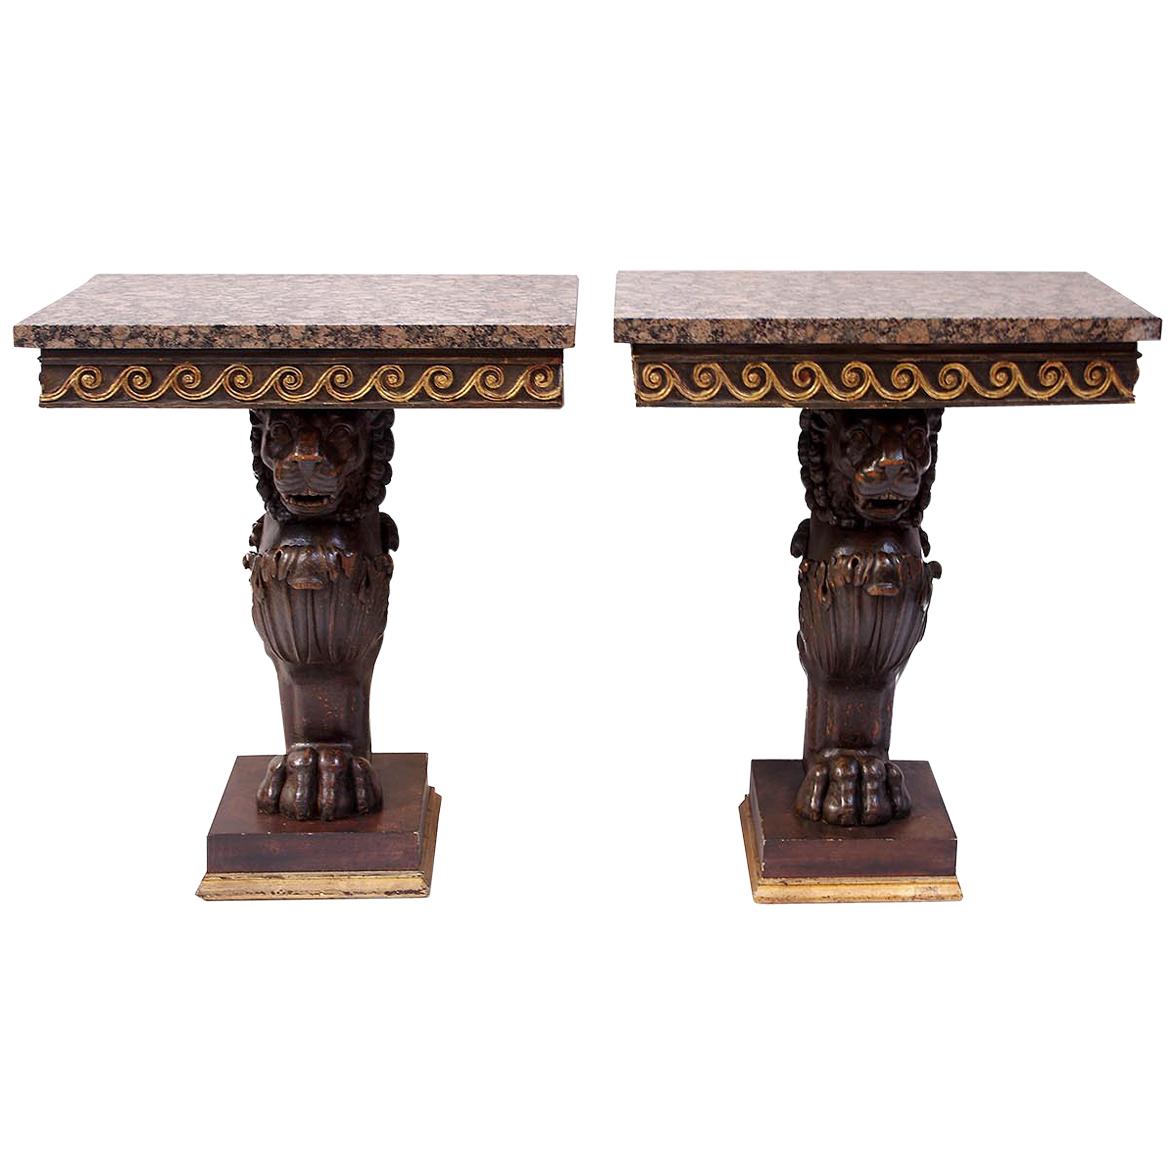 Pair of Lacquered Wood Pompeian Style Consoles with Lion Ornament